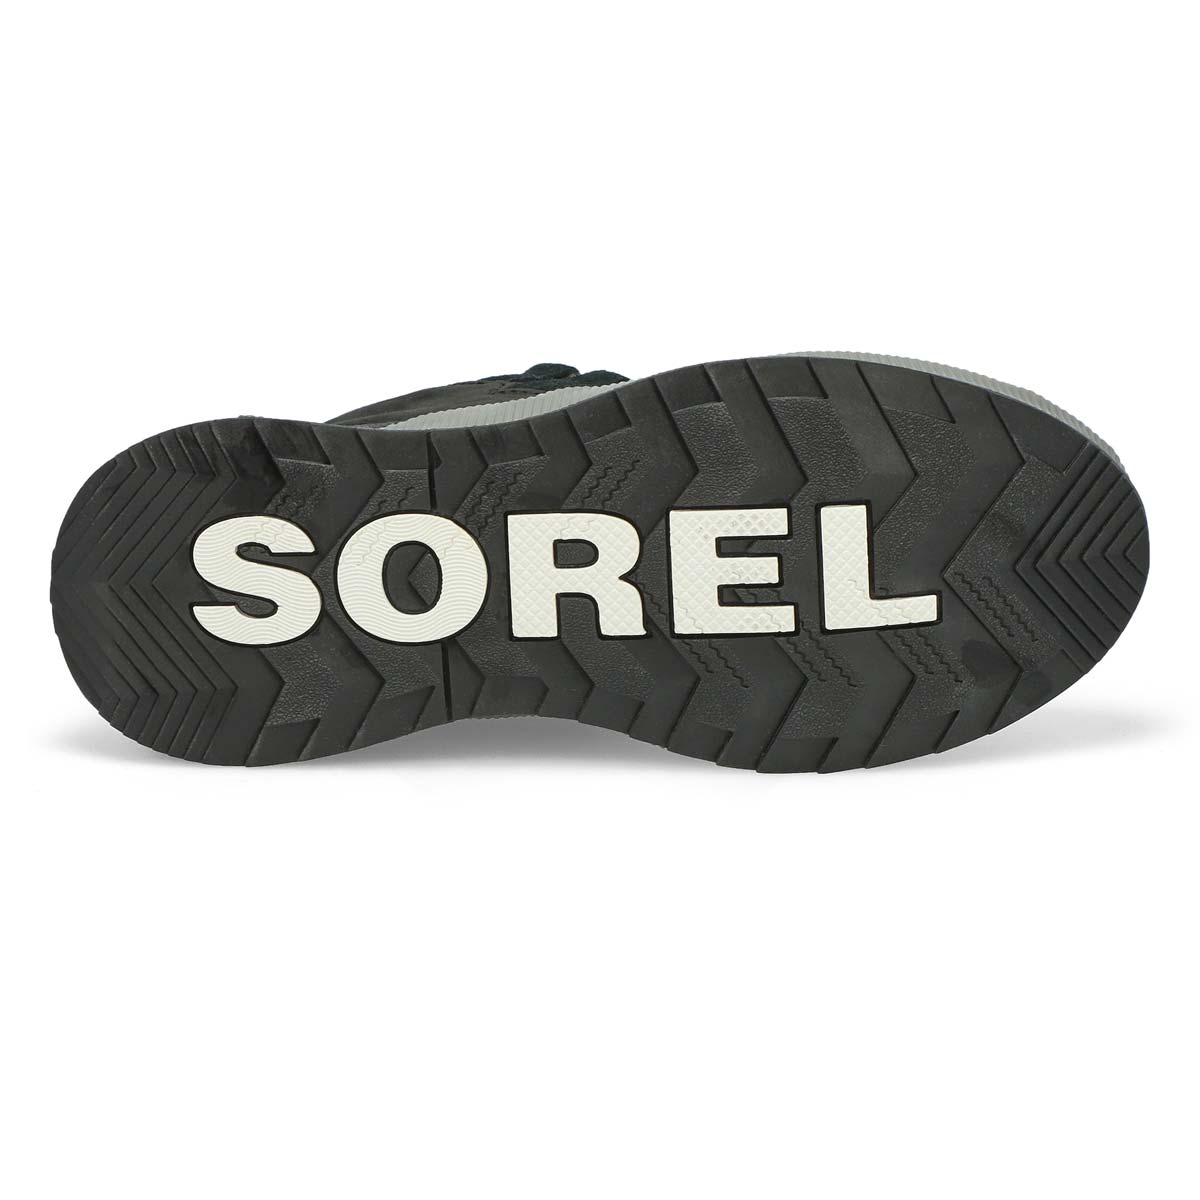 Sorel Women's Out'N About III Waterproof Boot | SoftMoc USA